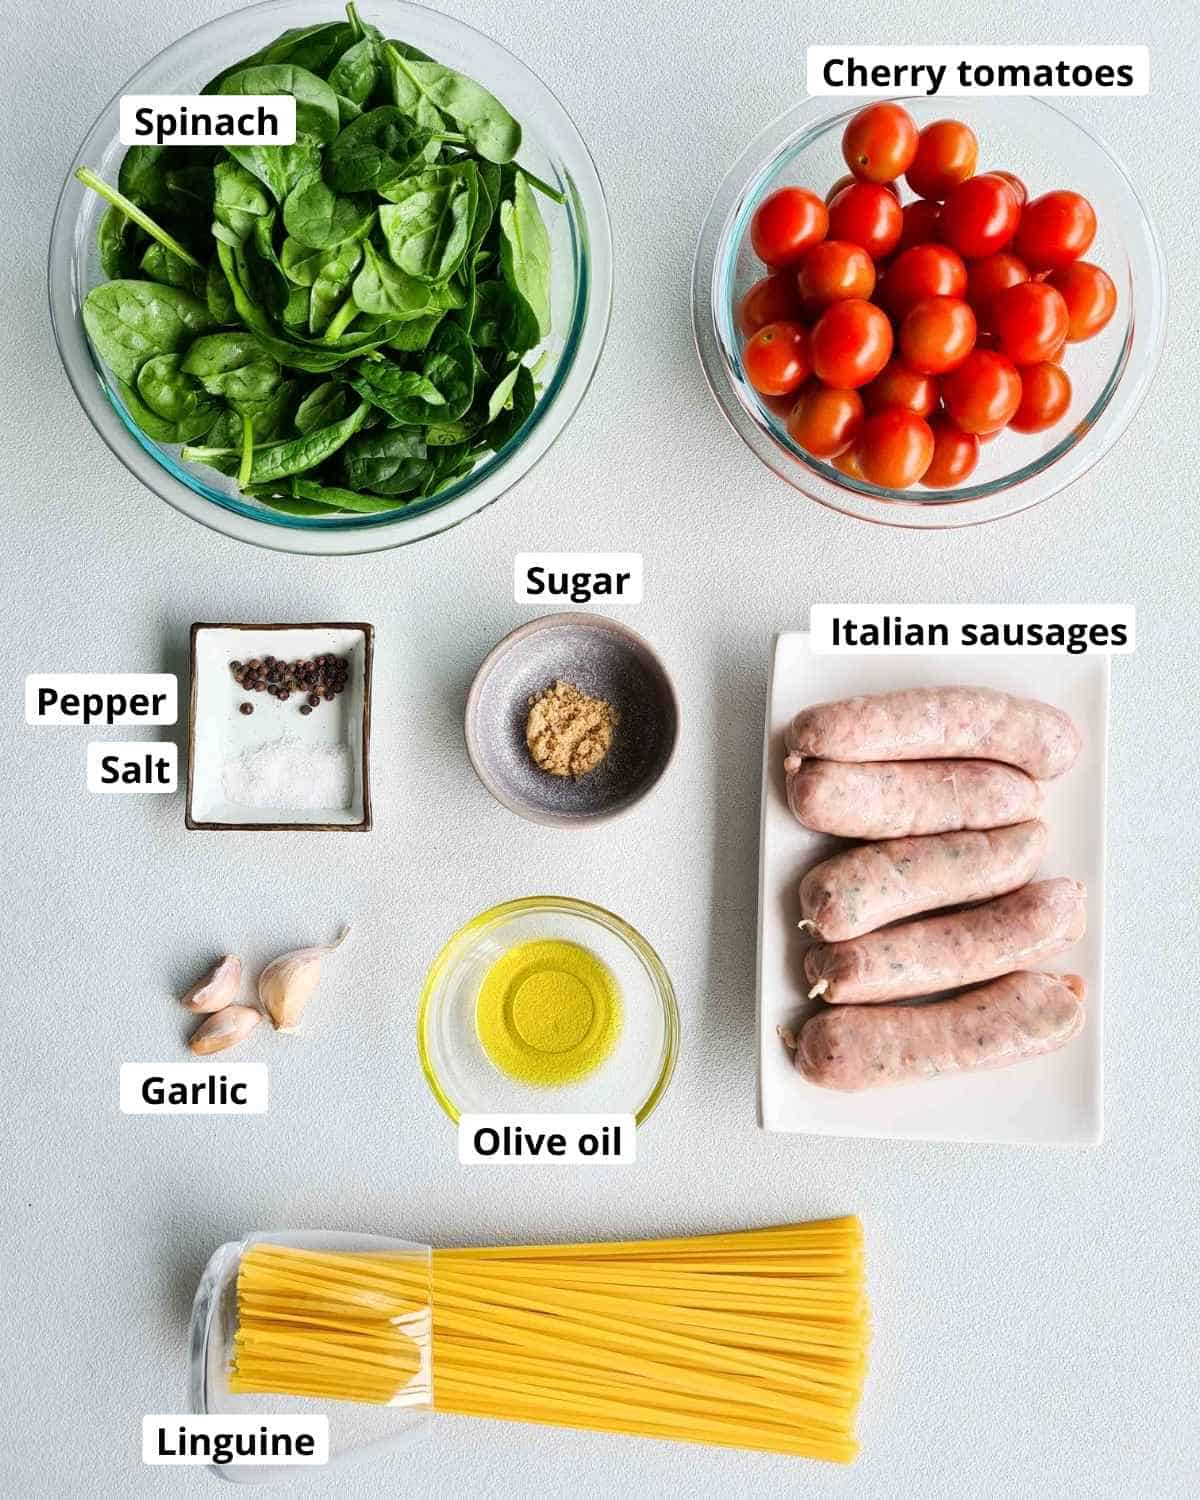 Ingredients required to make this recipe, labeled